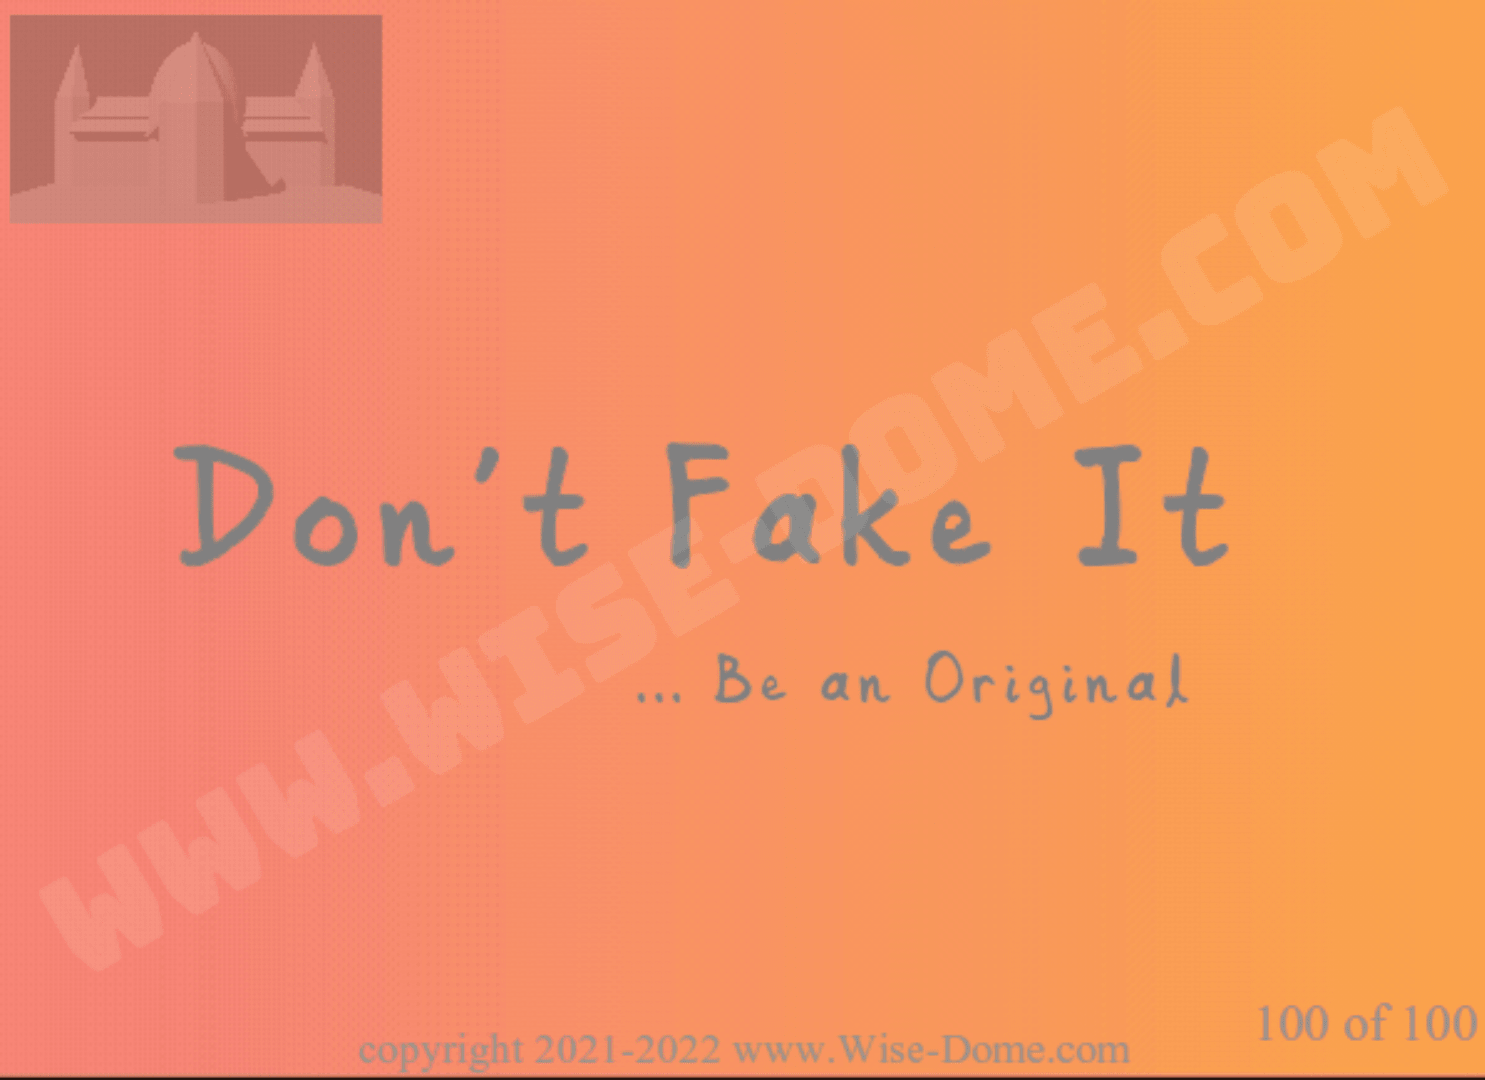 Tropical00005 - Don't Fake It!